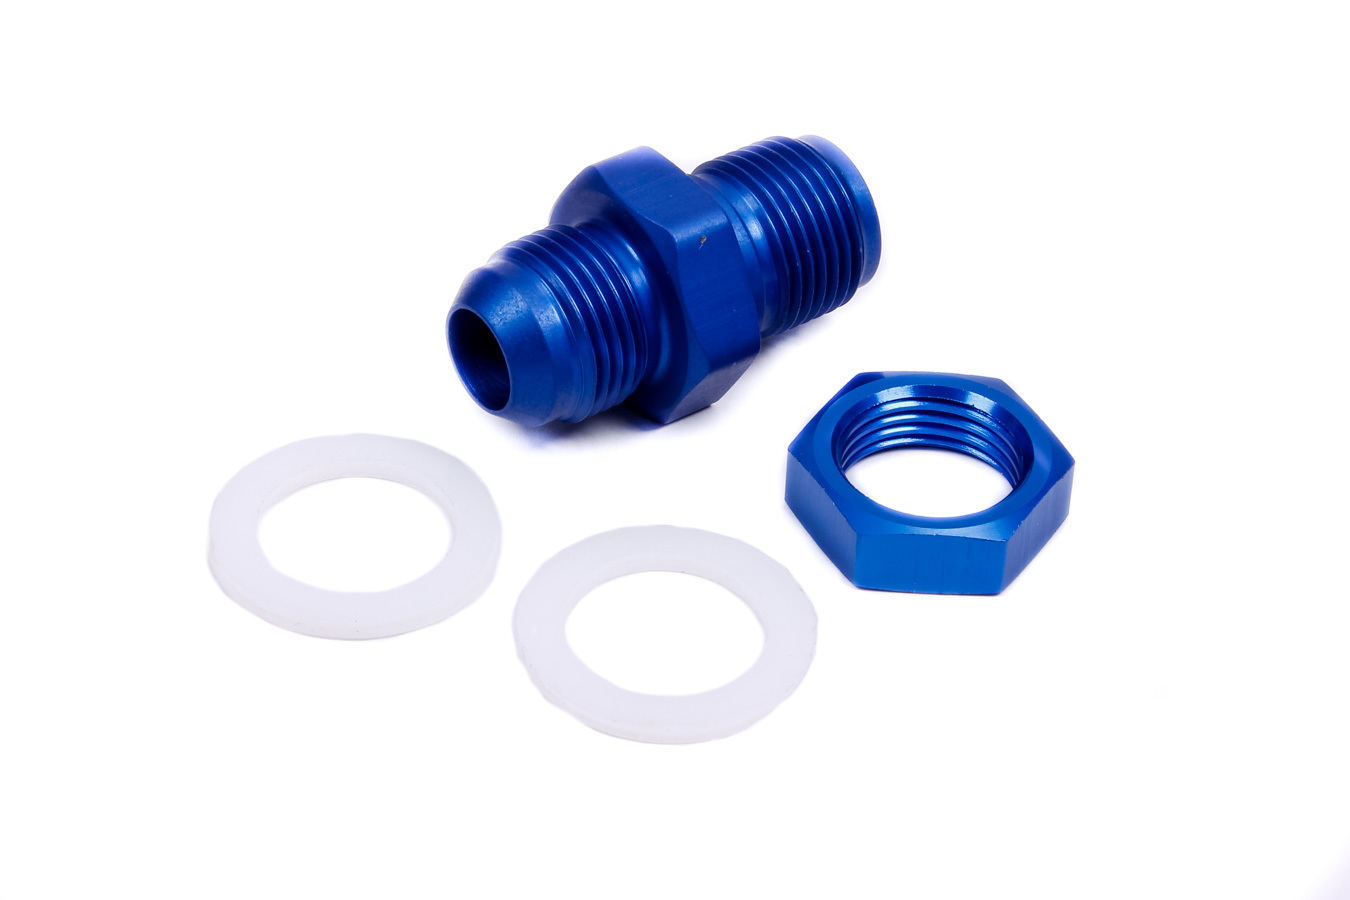 JAZ Products 832-110-11 Fitting, Bulkhead, Straight, 10 AN Male to 10 AN Male Bulkhead, PTFE Gaskets Included, Aluminum, Blue Anodized, JAZ Fast Flow Fuel Cells, Each